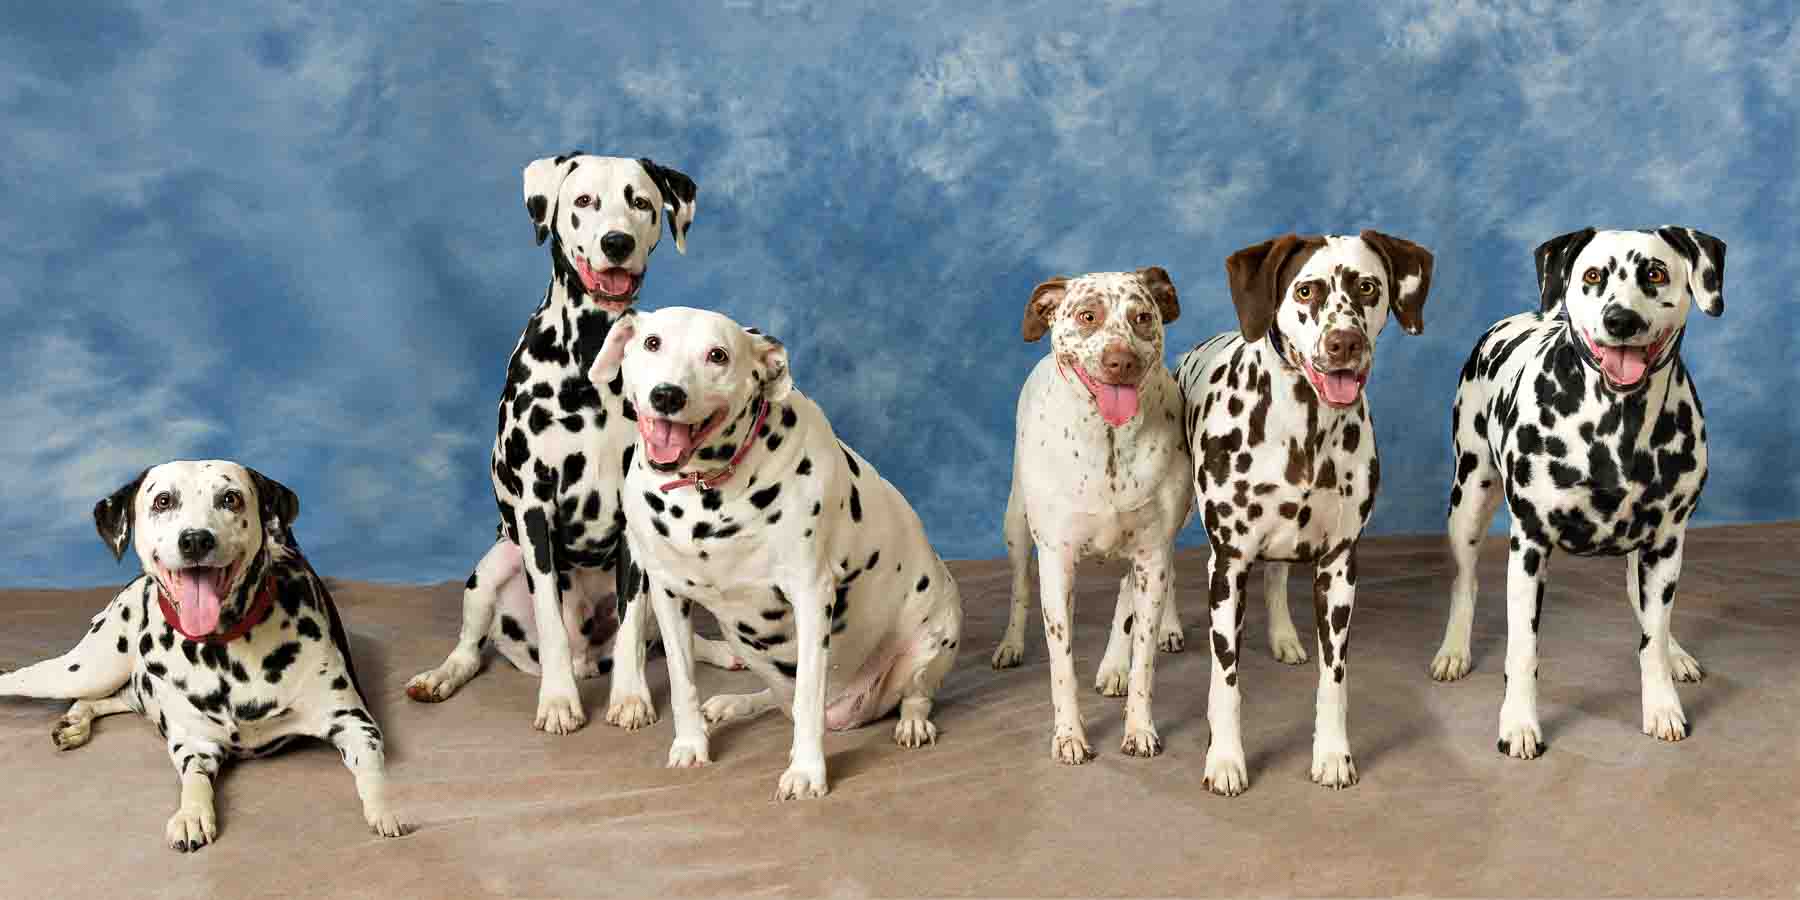 Four dalmatian dogs sitting in a row on the ground.